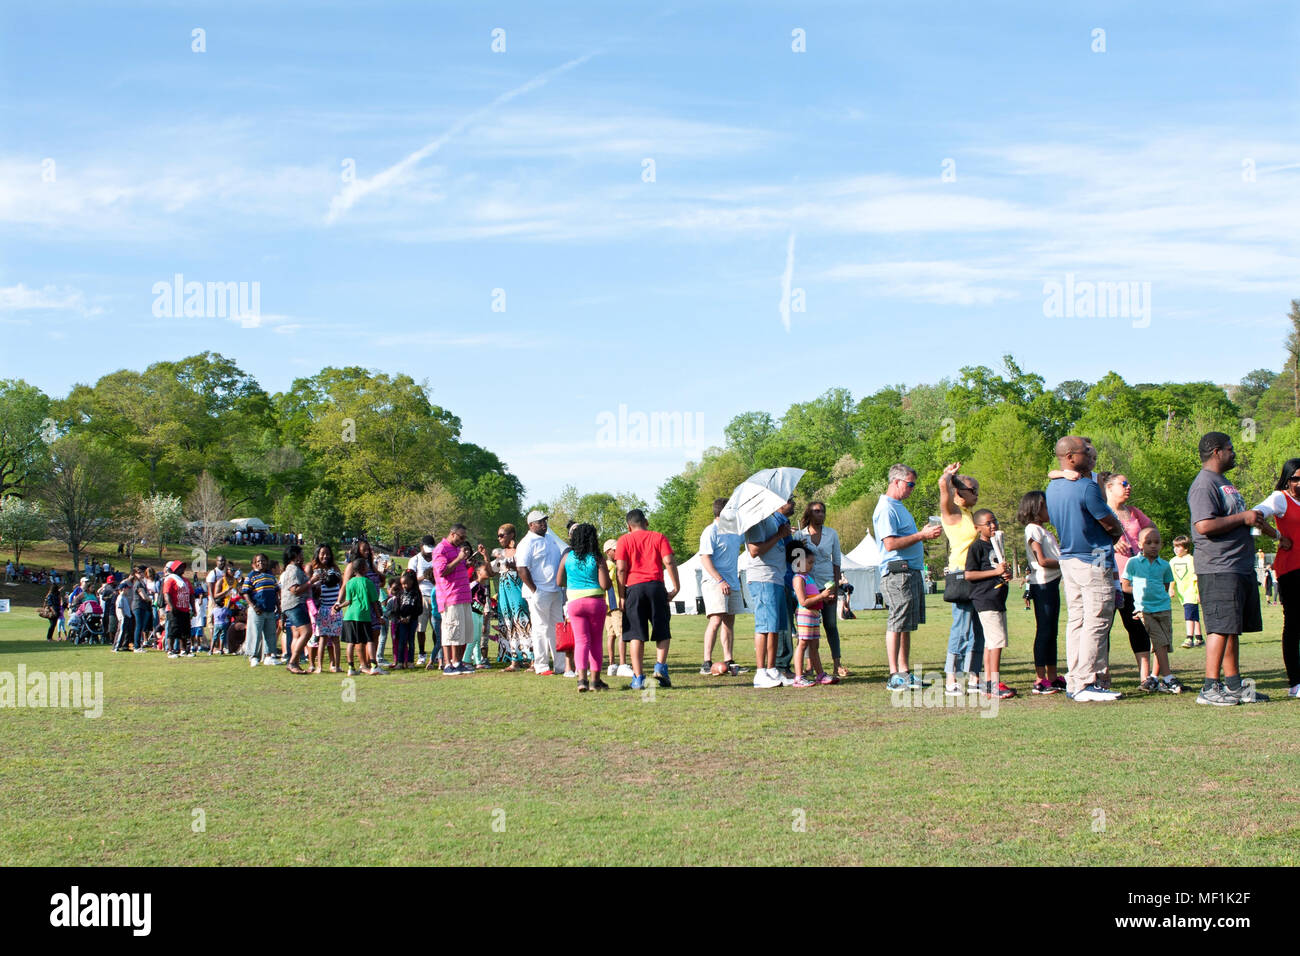 A line of parents waits with their kids for their turn on the bungee jumping ride at the Atlanta Dogwood Festival on April 11, 2015 in Atlanta, GA. Stock Photo